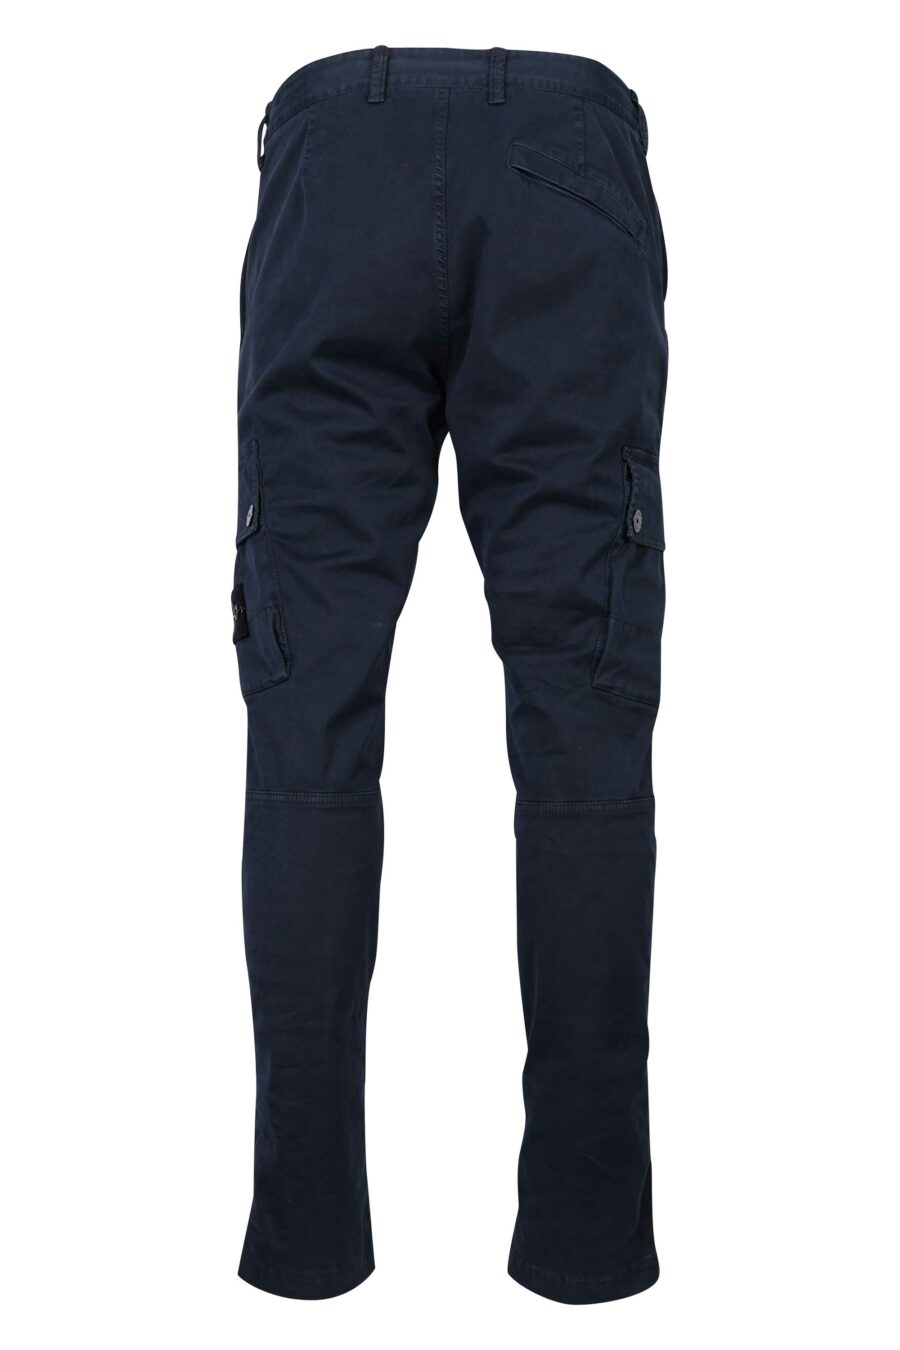 Blue slim trousers with side logo patch - 8052572735042 2